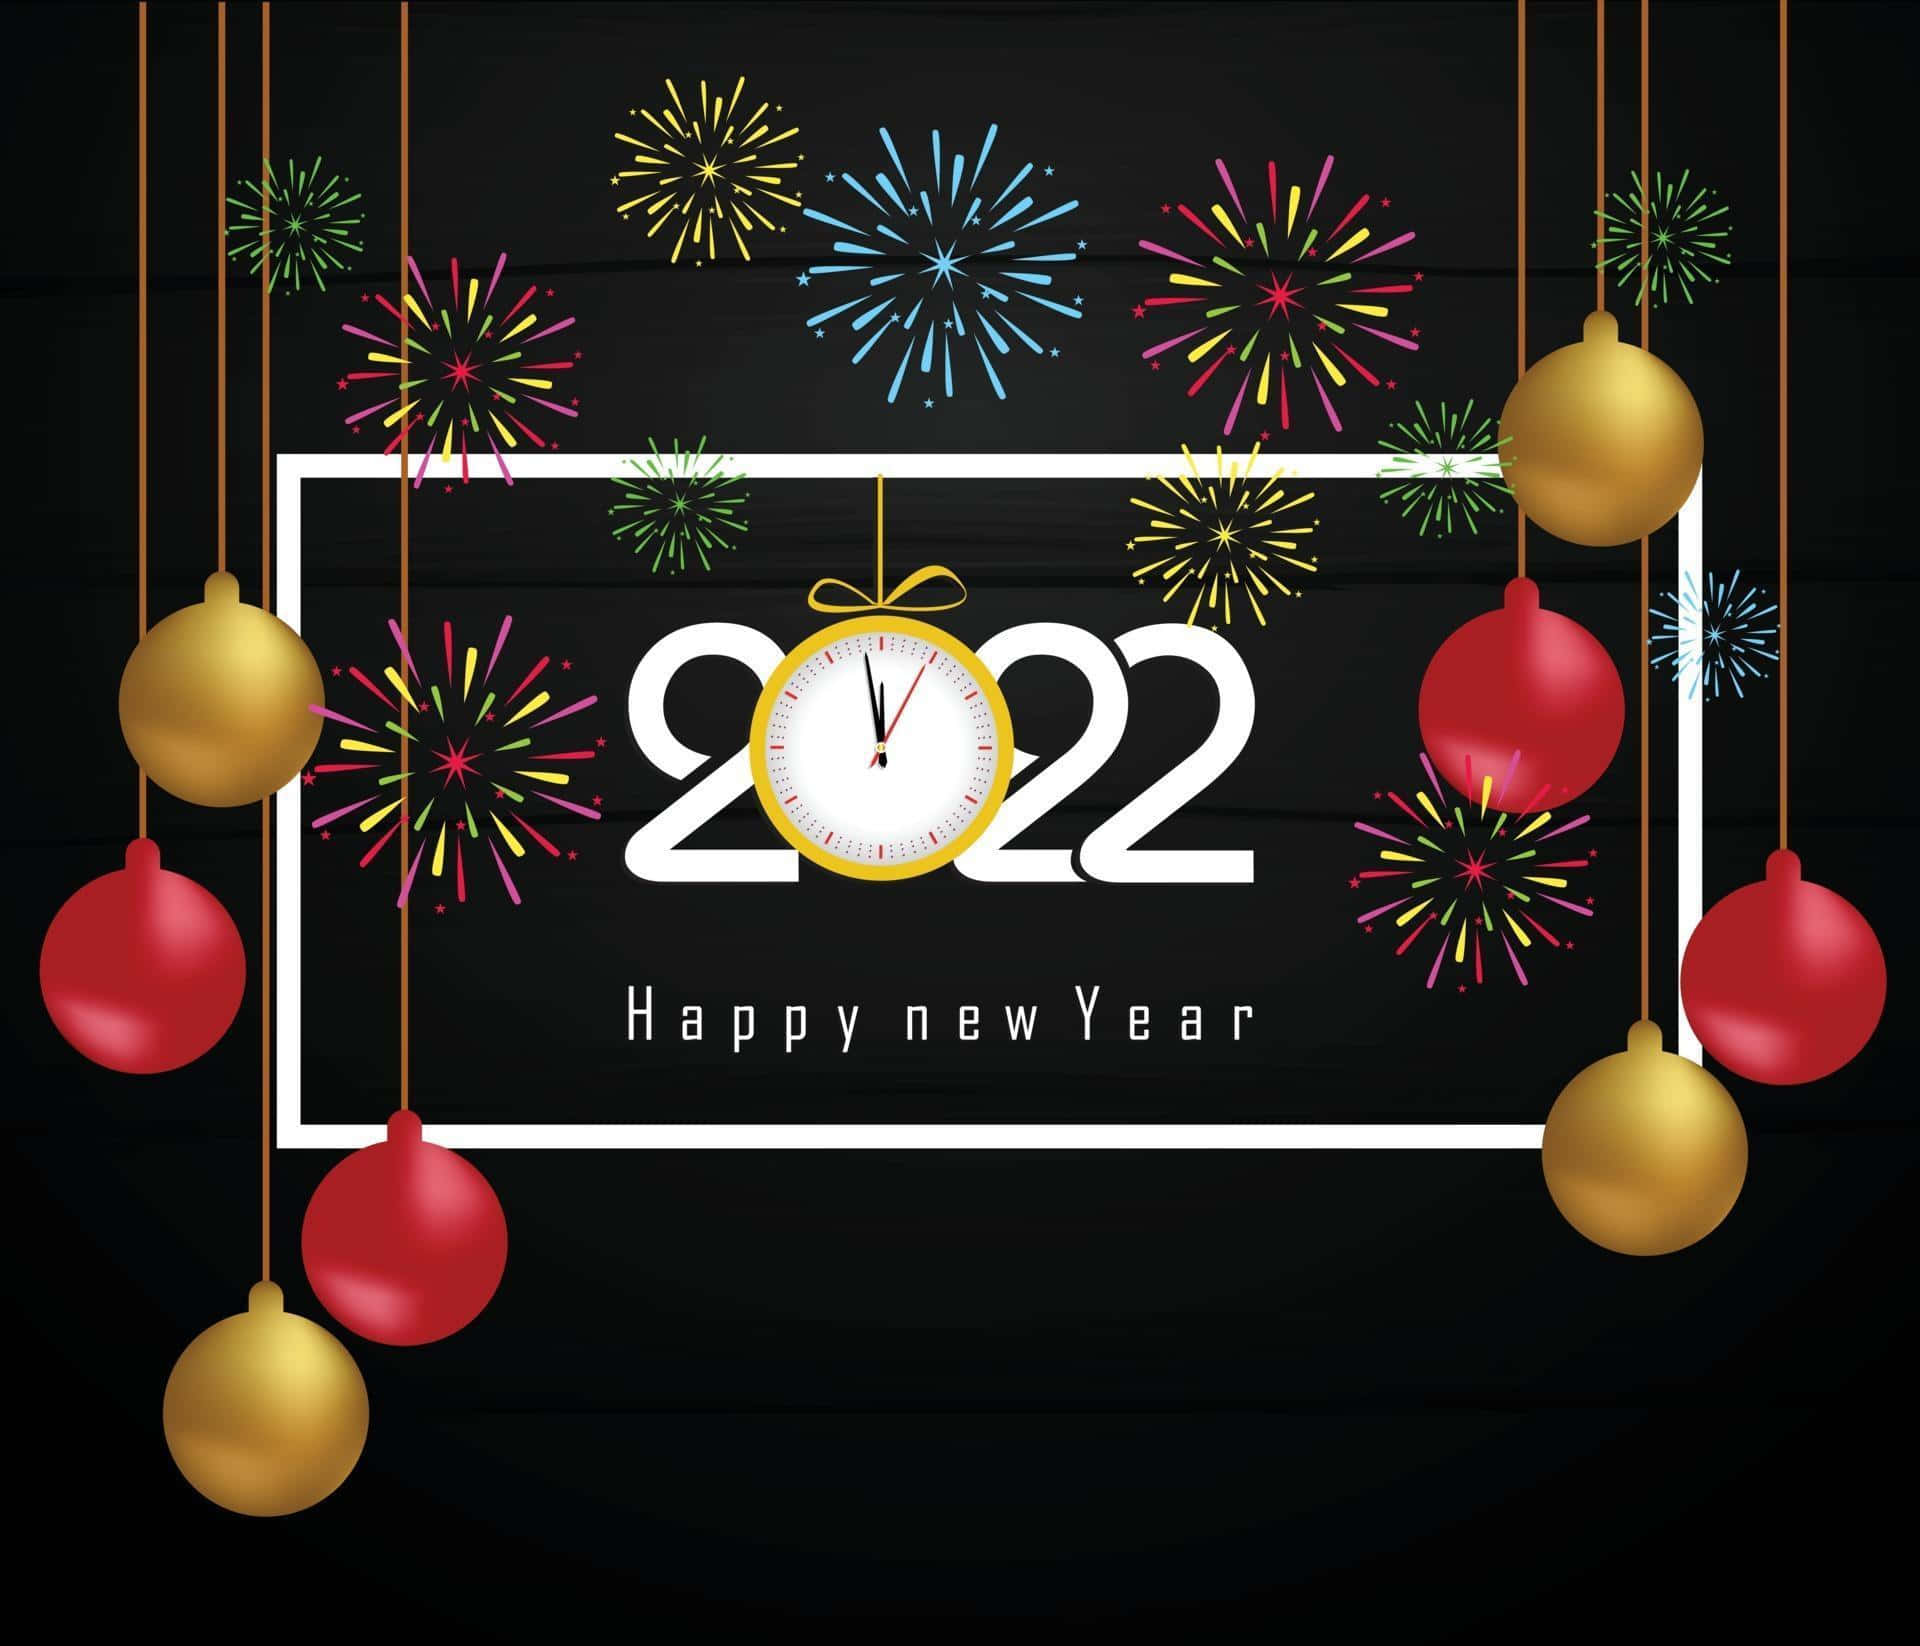 Make a Wish for a Happy New Year 2022!